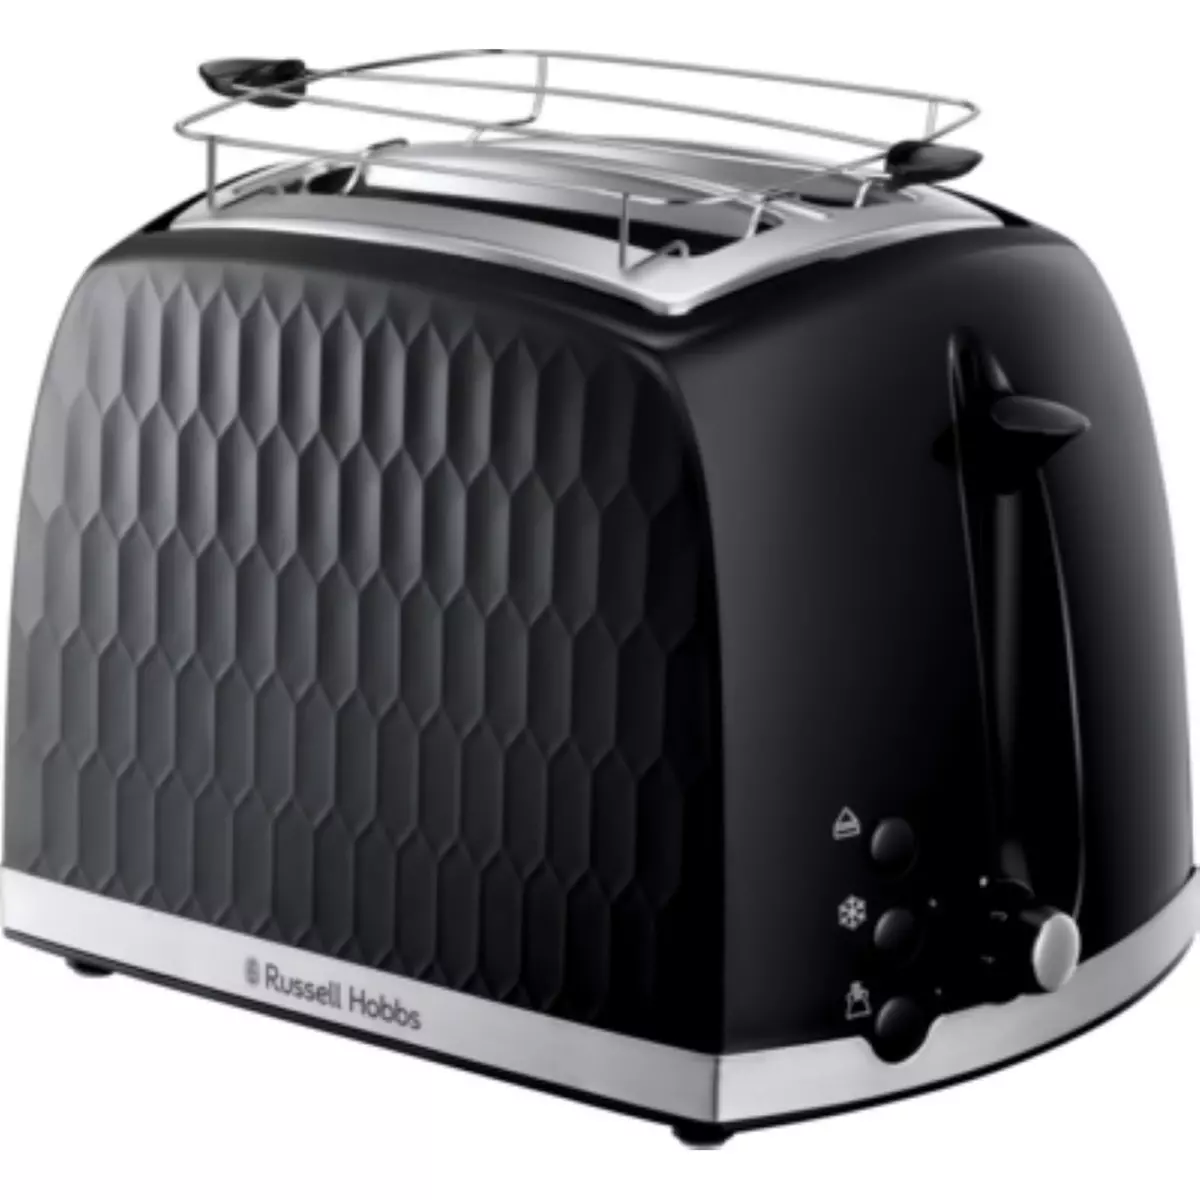 Grille Pain Russell Hobbs 21395-56 à Prix Carrefour